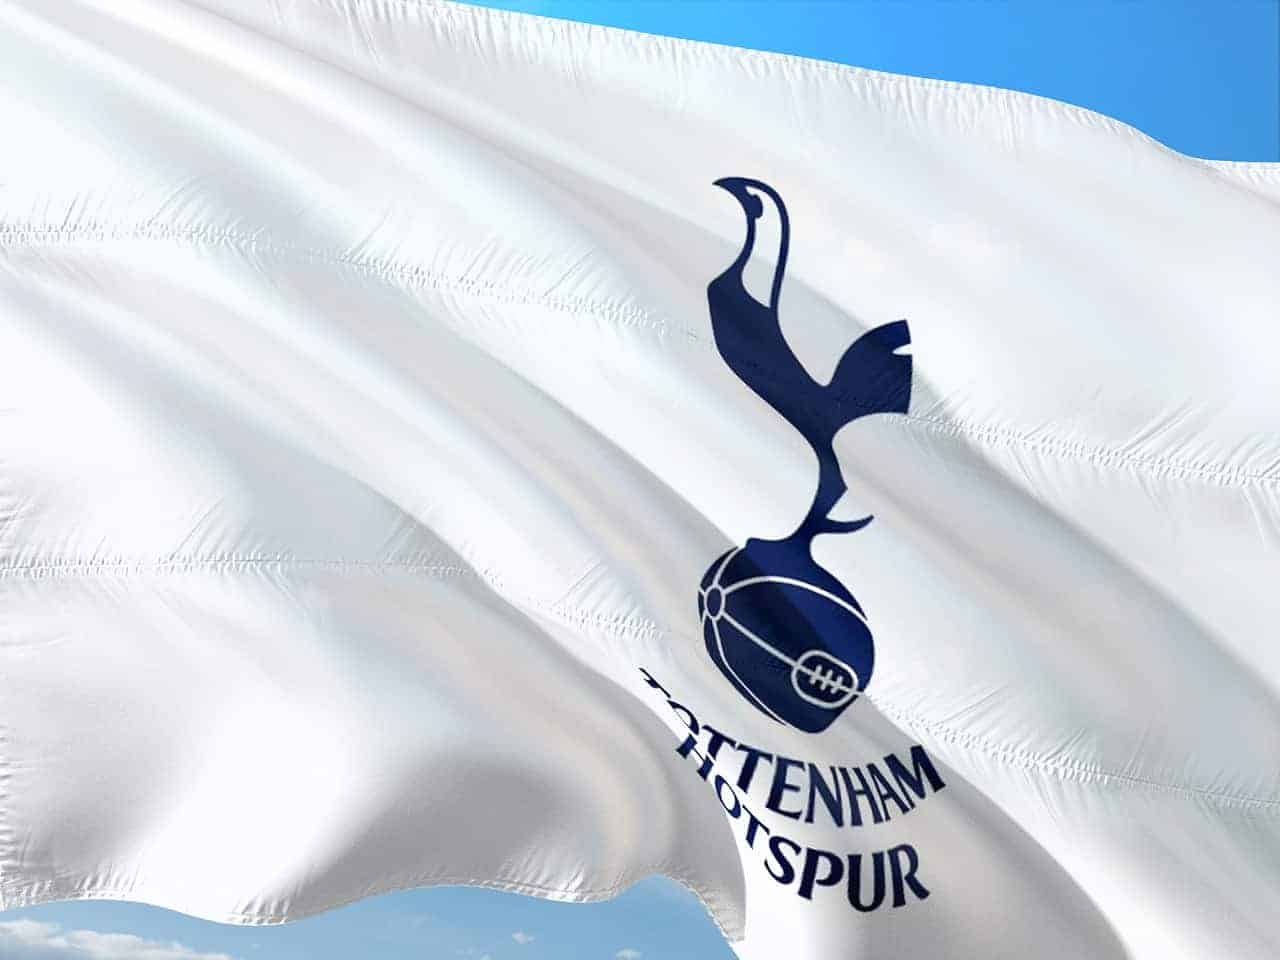 Injury blow for Spurs new signing as they are still chasing star striker